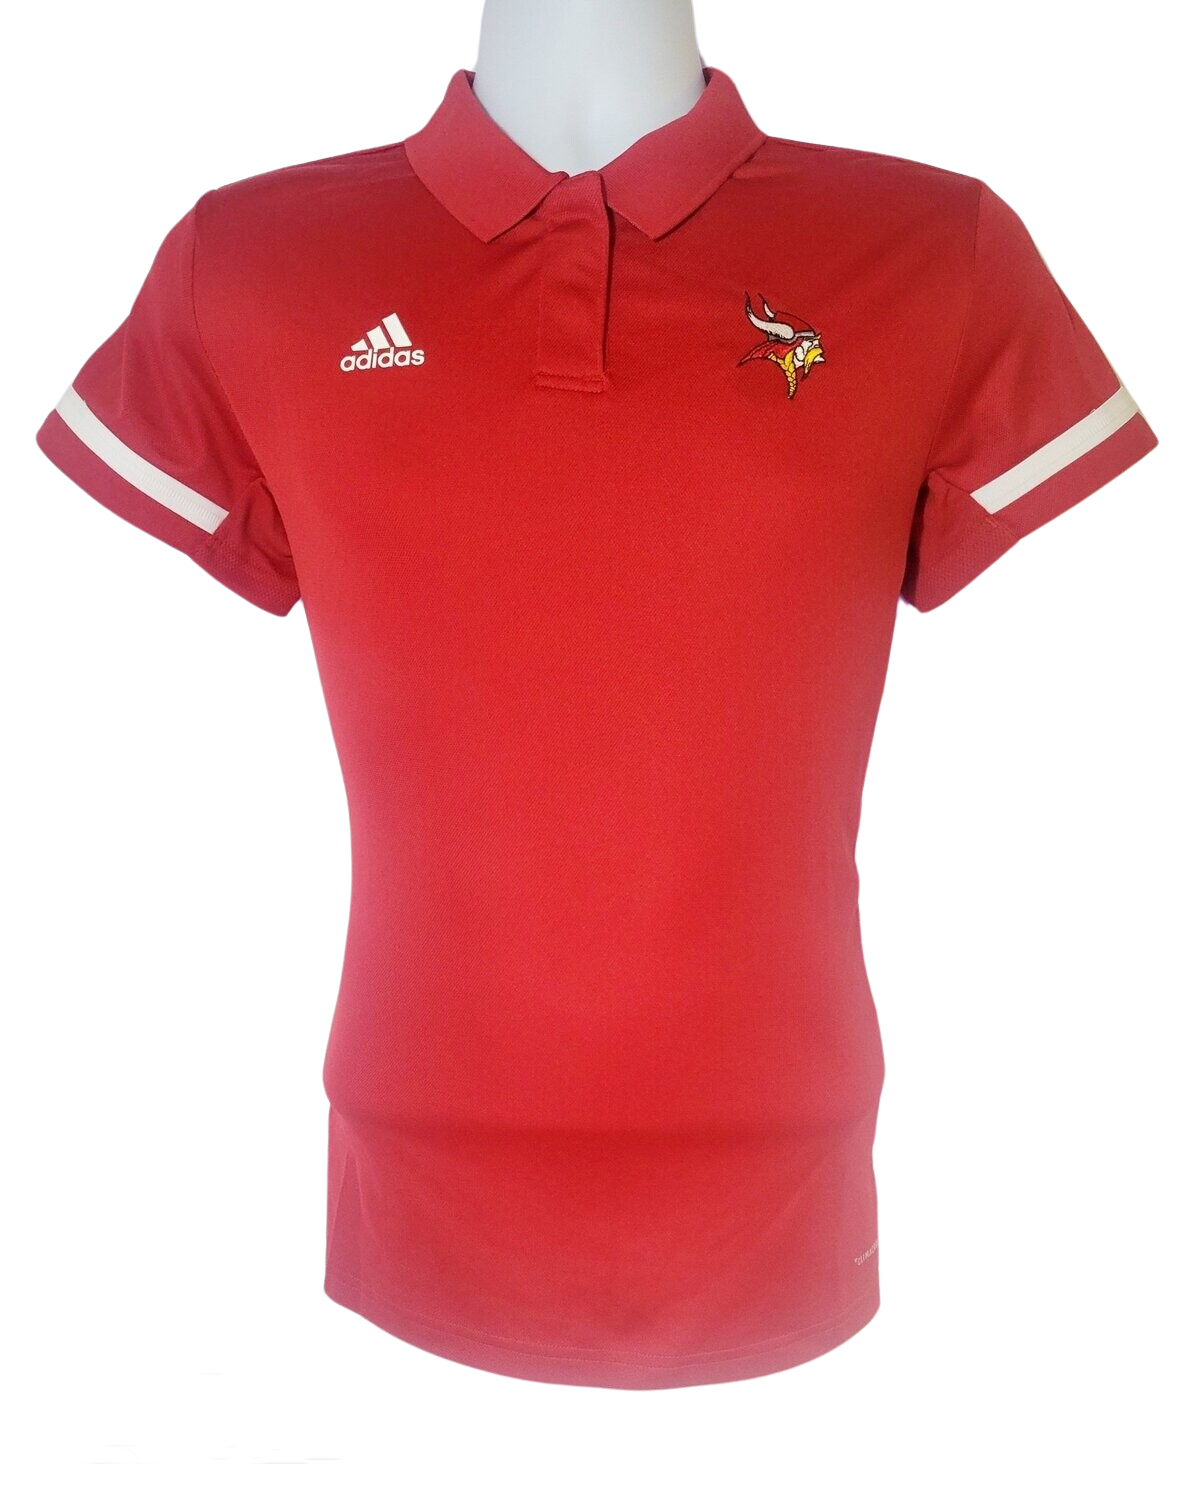 adidas Male Team Polo Red Shirt Size Large